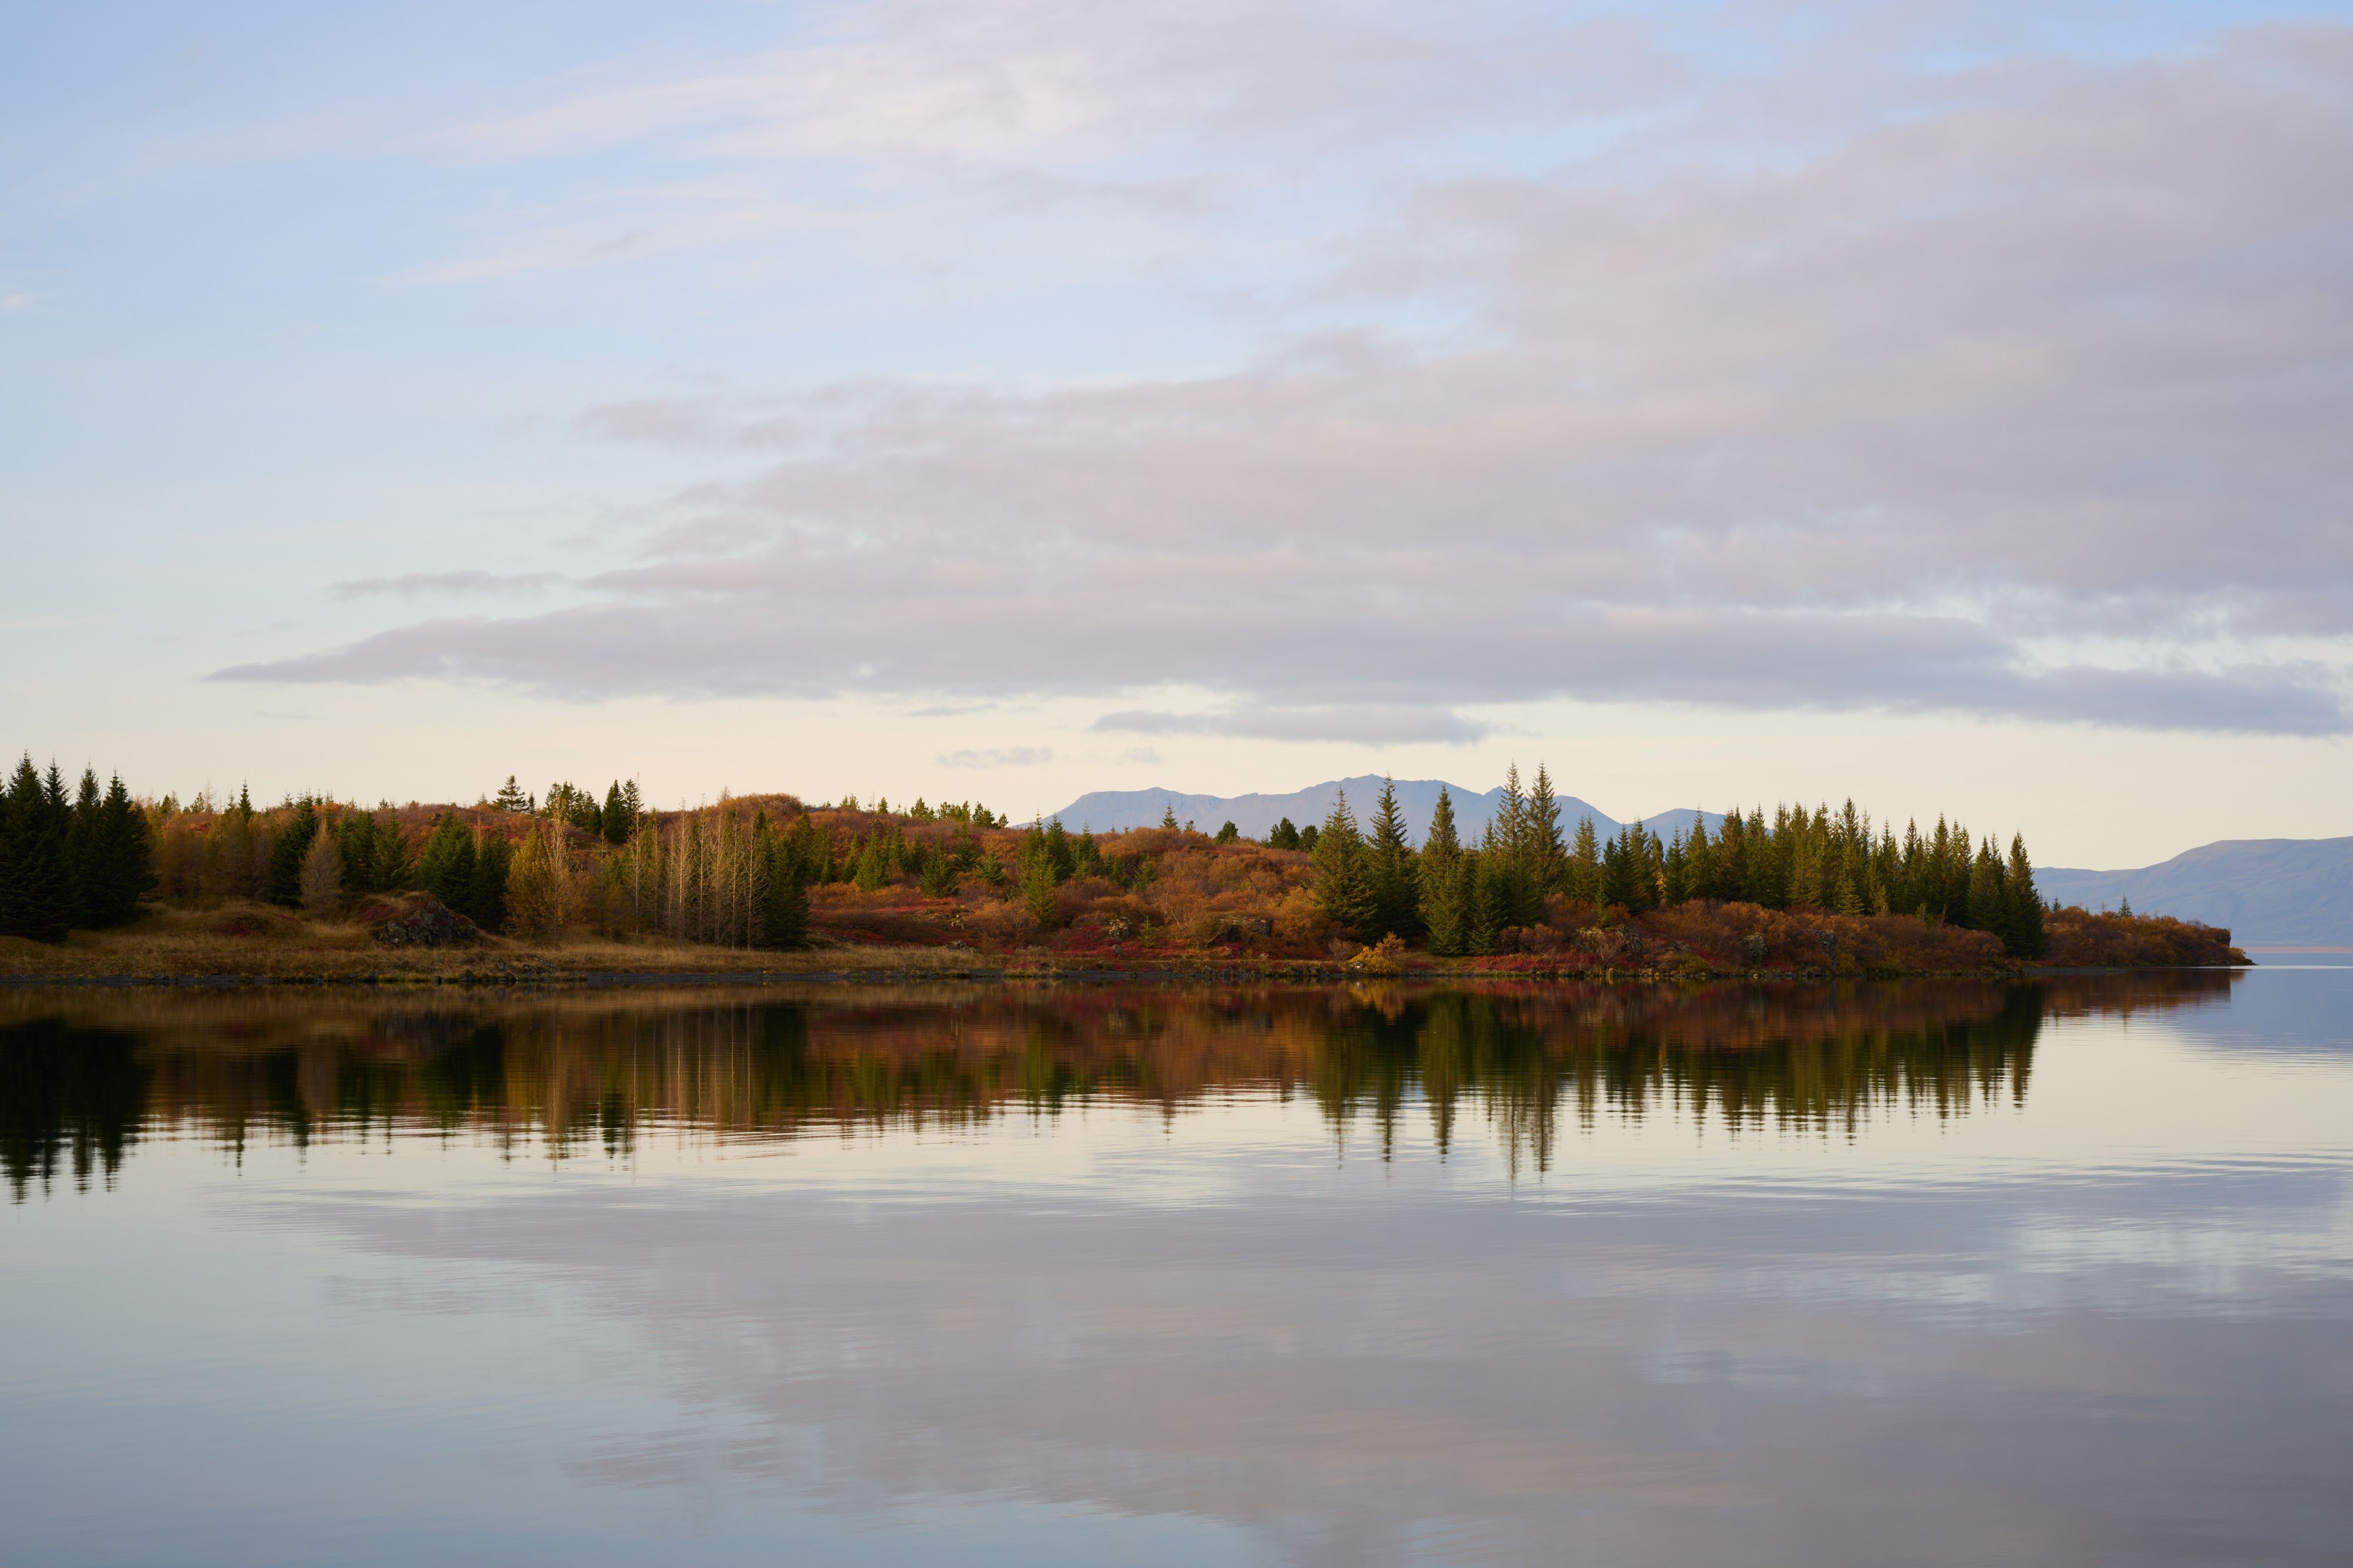 A line of reddening as well as evergreen trees reflecting in the lake during sunset